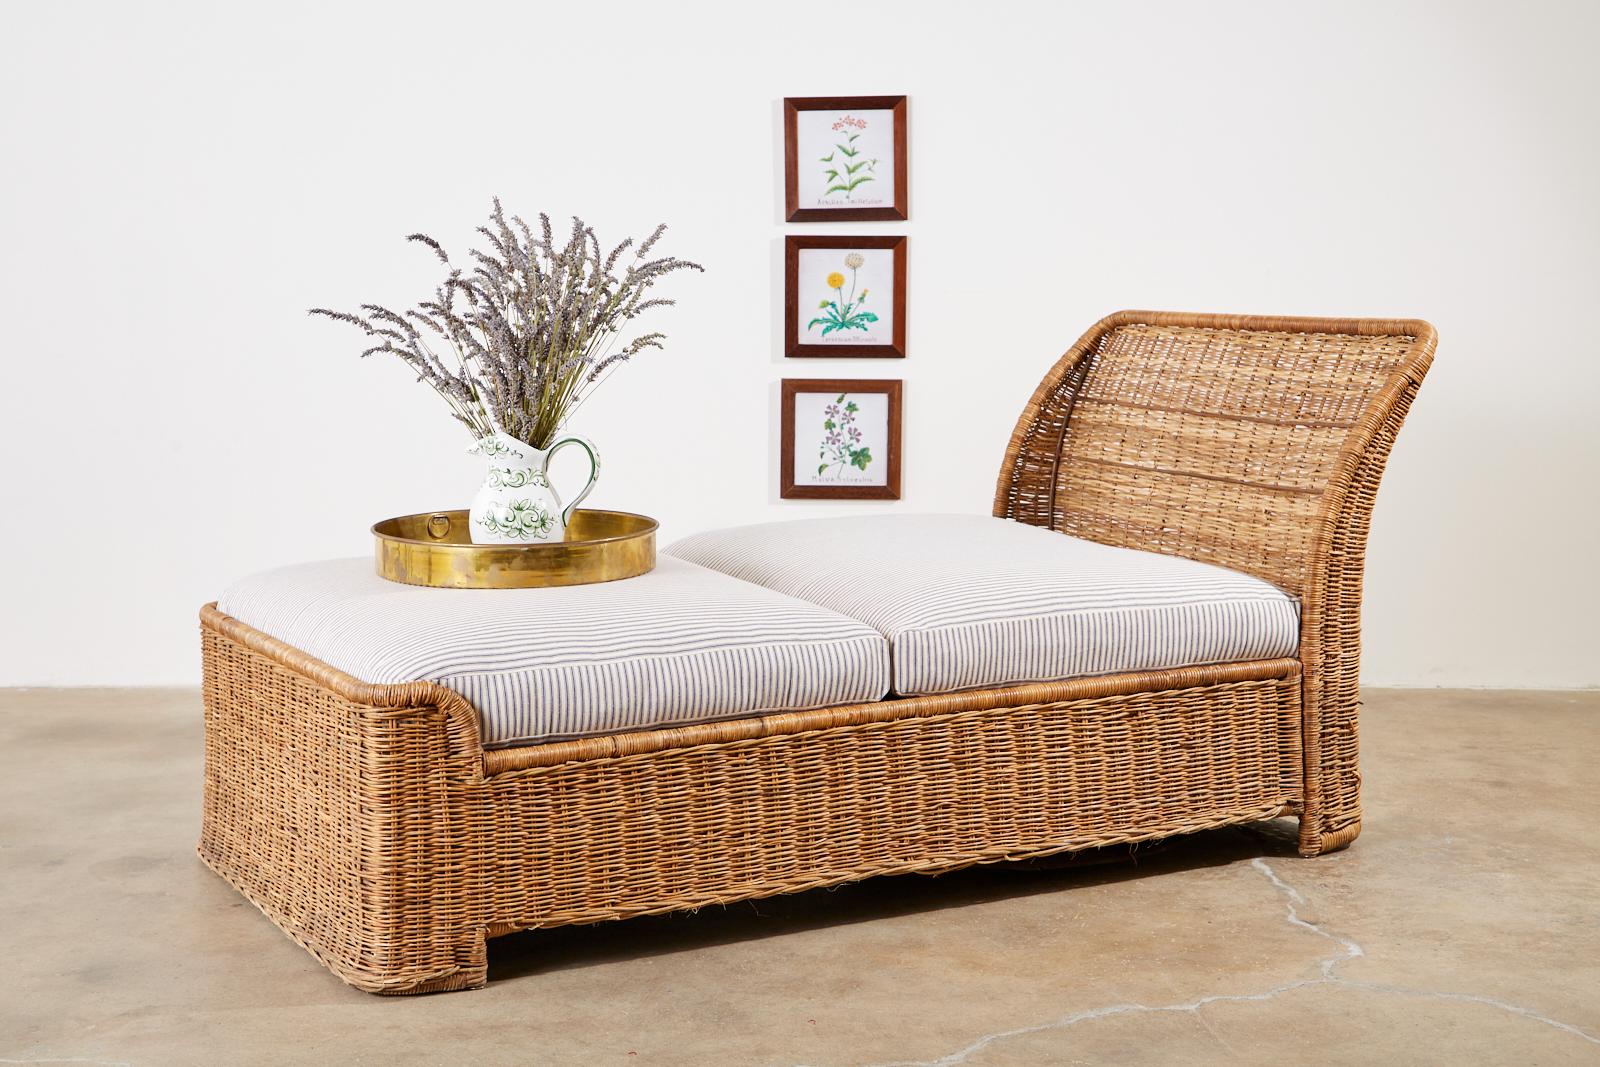 20th century wicker daybed or chaise lounge featuring a sleigh style form. Constructed from a metal frame covered with woven wicker in an organic modern style. Newly upholstered cushions and pillow with classic French blue and white ticking stripe